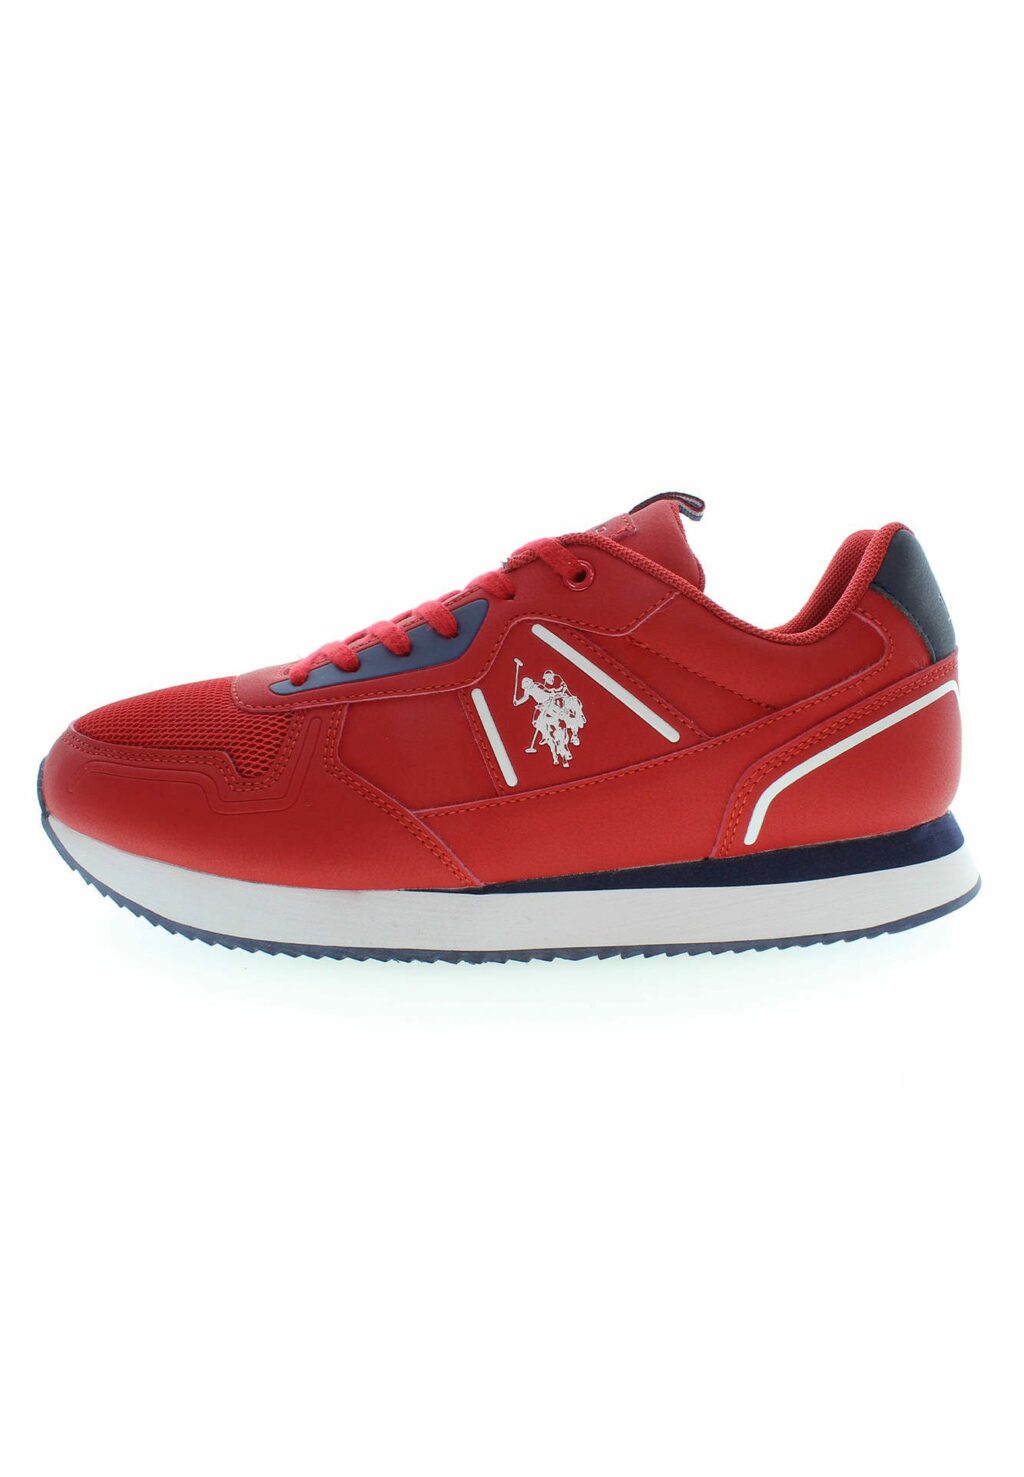 US POLO BEST PRICE MEN'S SPORTS SHOES RED NOBIL004MBYM1_ROSSO_RED001